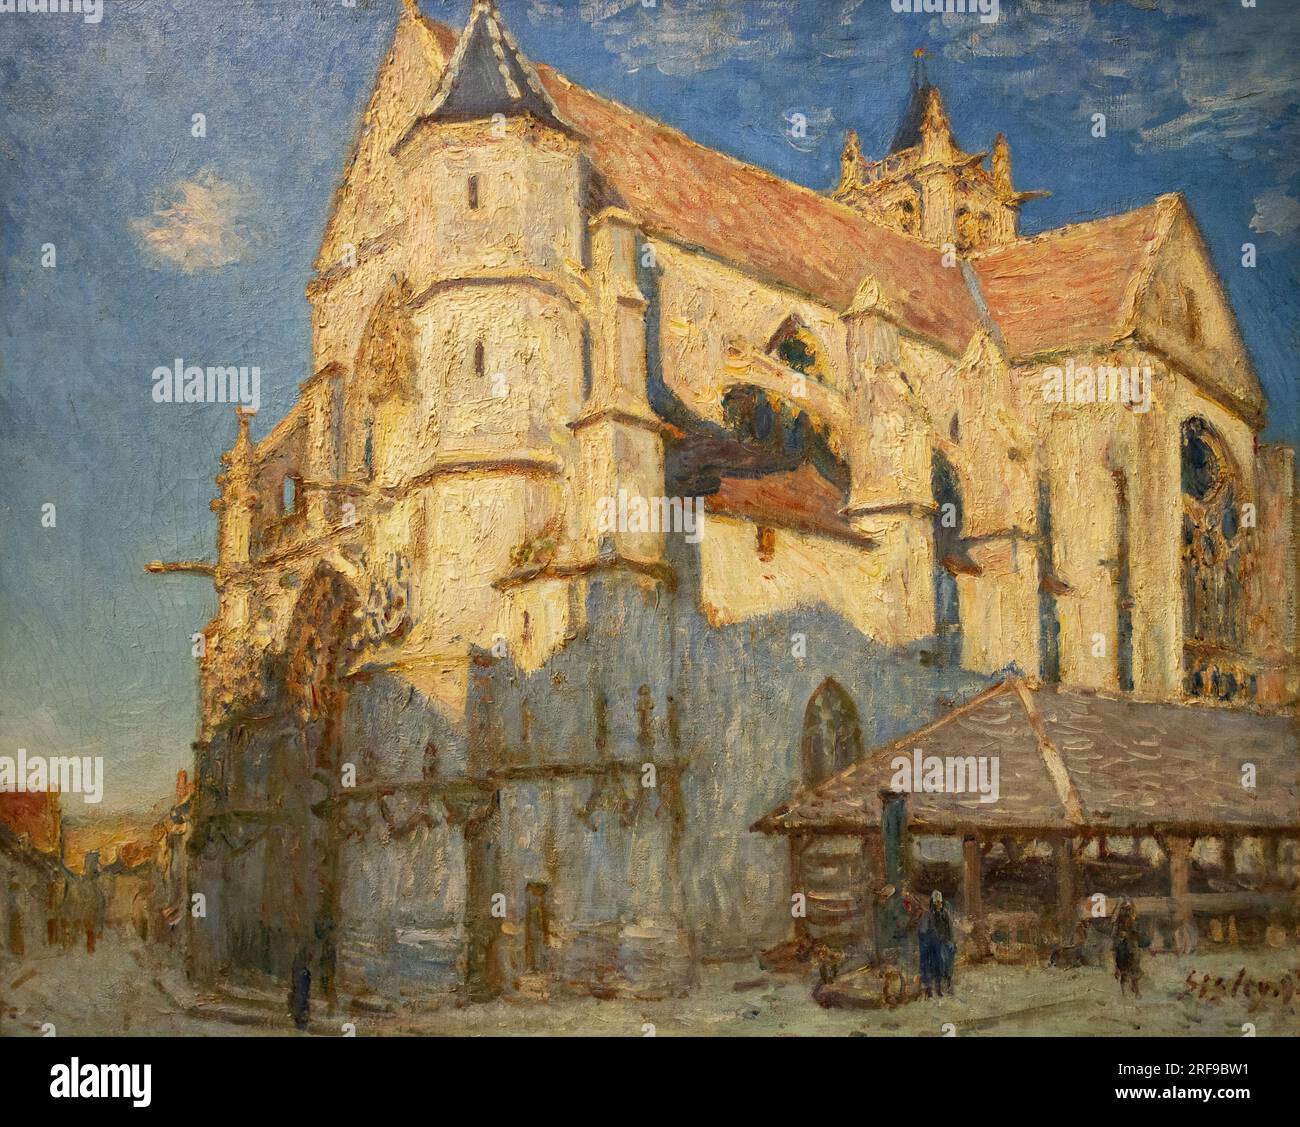 Alfred Sisley painting, L'eglise de Moret, temps de gelee, (Moret church frosty weather); 1893; 19th century impressionist painter living in France. Stock Photo